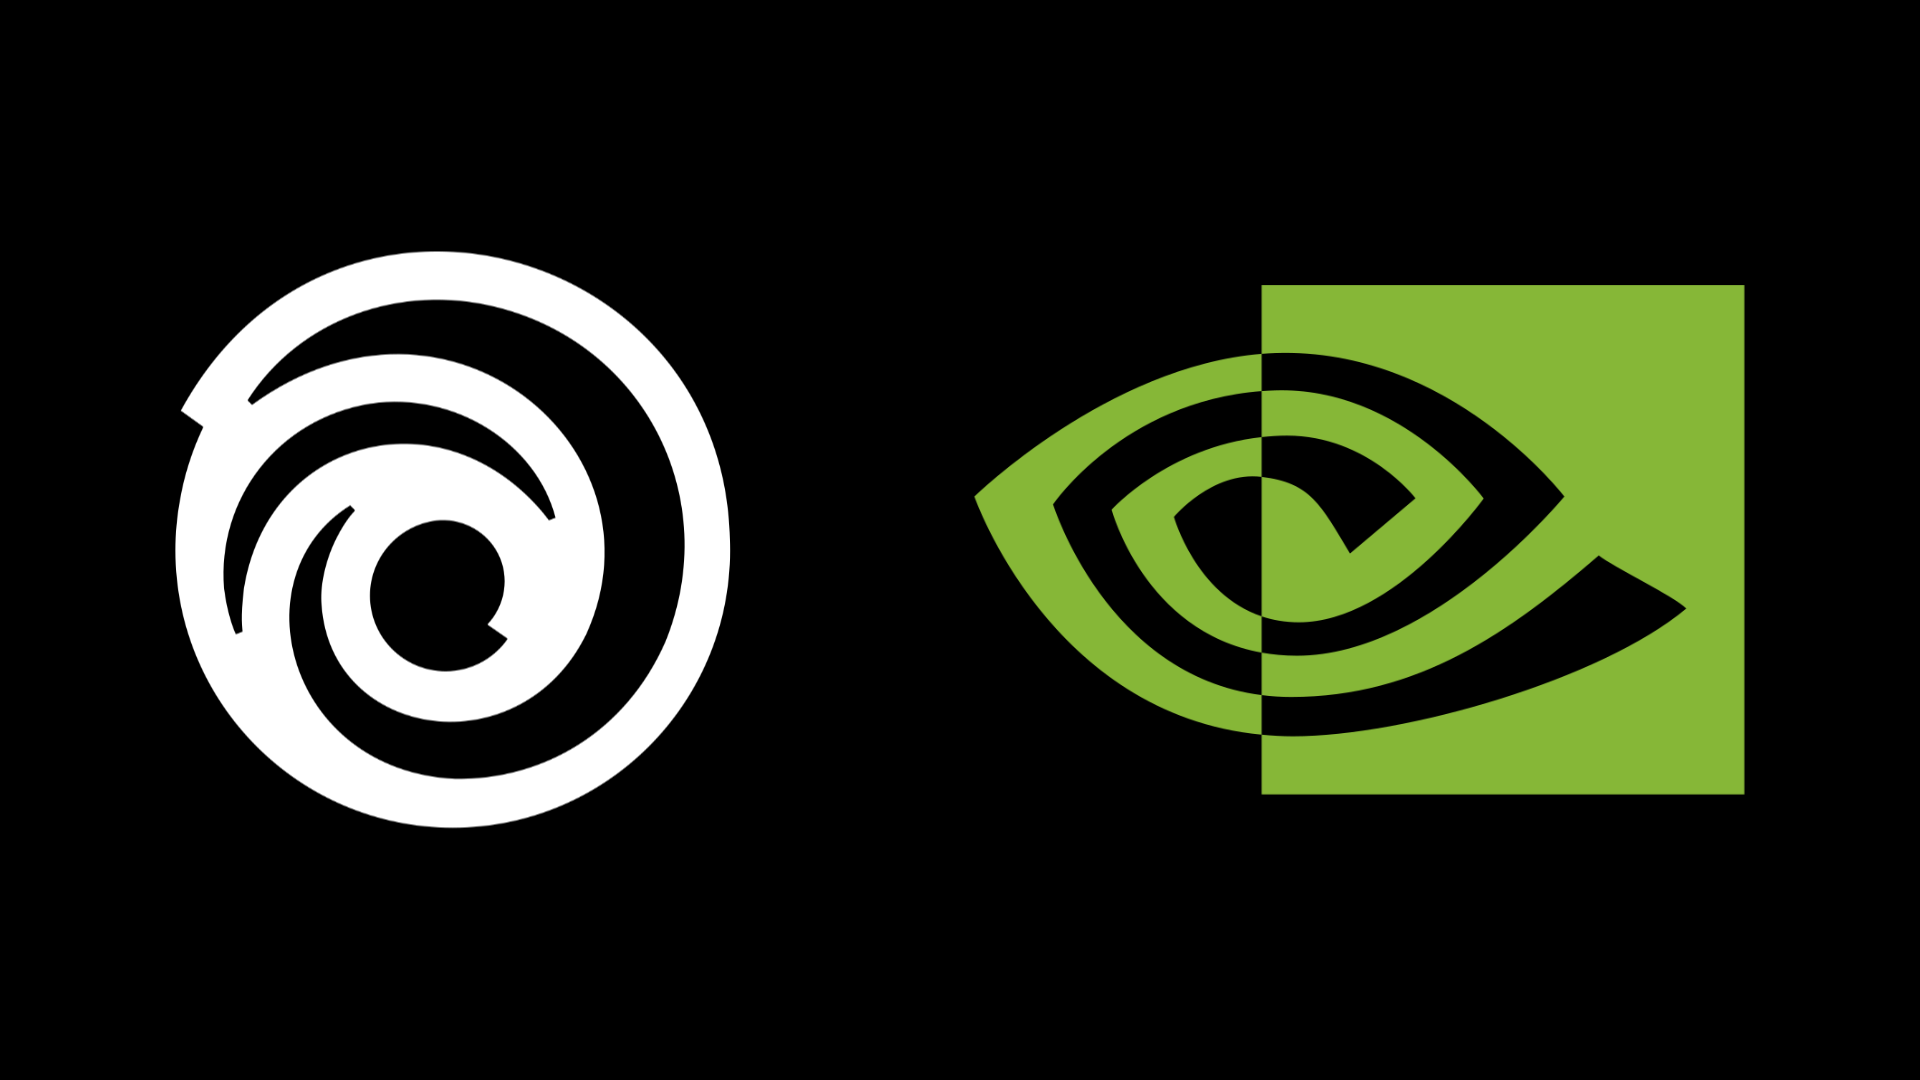 Nvidia forced to remove Activision Blizzard games from GeForce Now